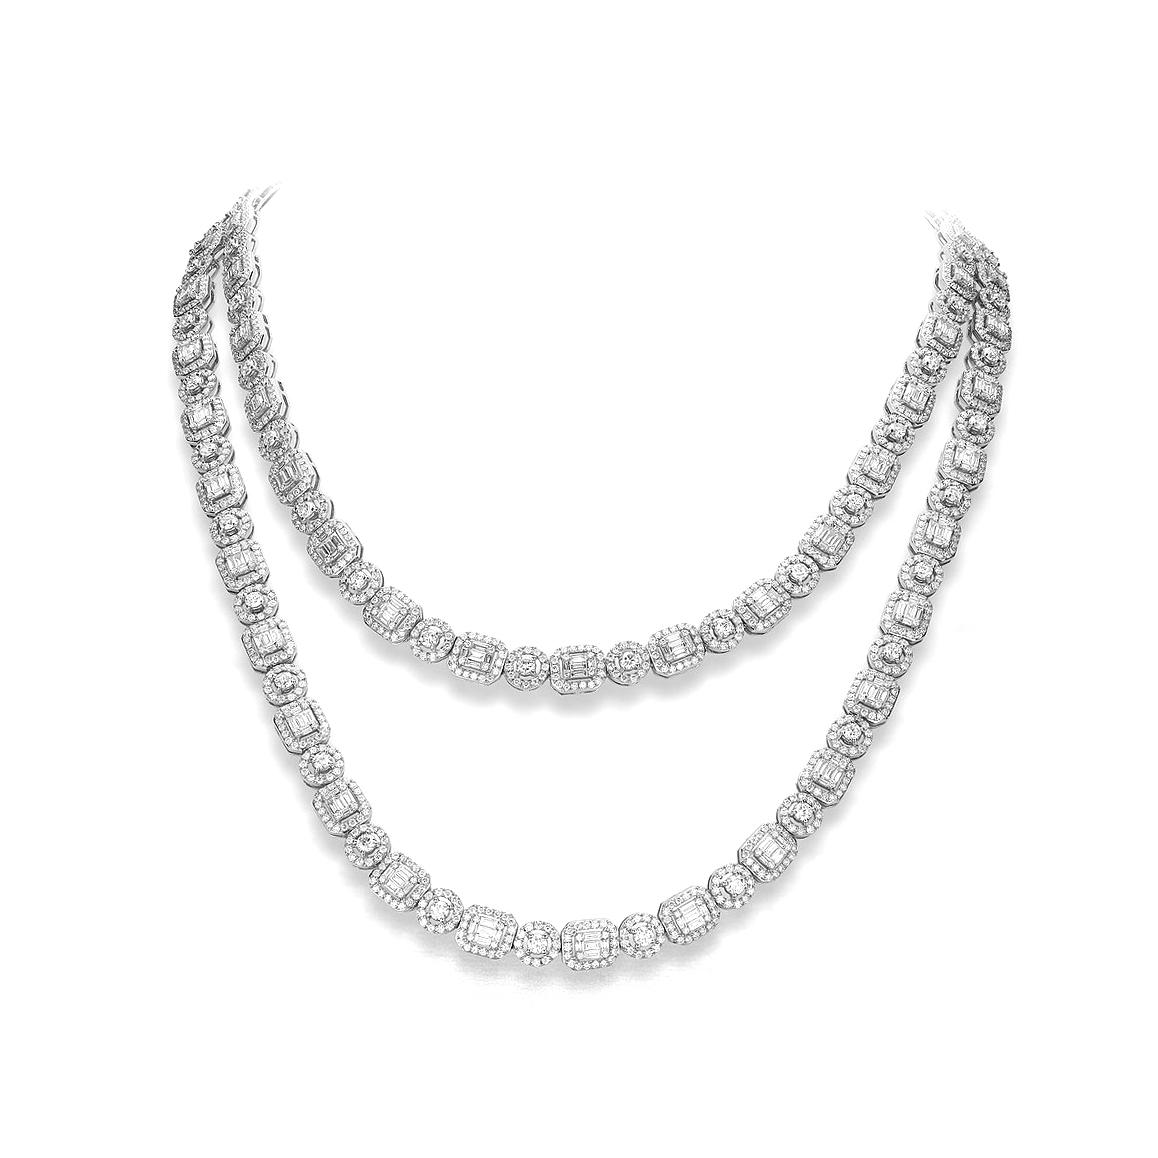 Necklace in 18kt white gold set with 235 baguette cut diamonds 4.59 cts and 1645 diamonds 13.97 cts 

Total length: 74.00 cm (29.13 inch).

Gross weight: 66.38 grams.      